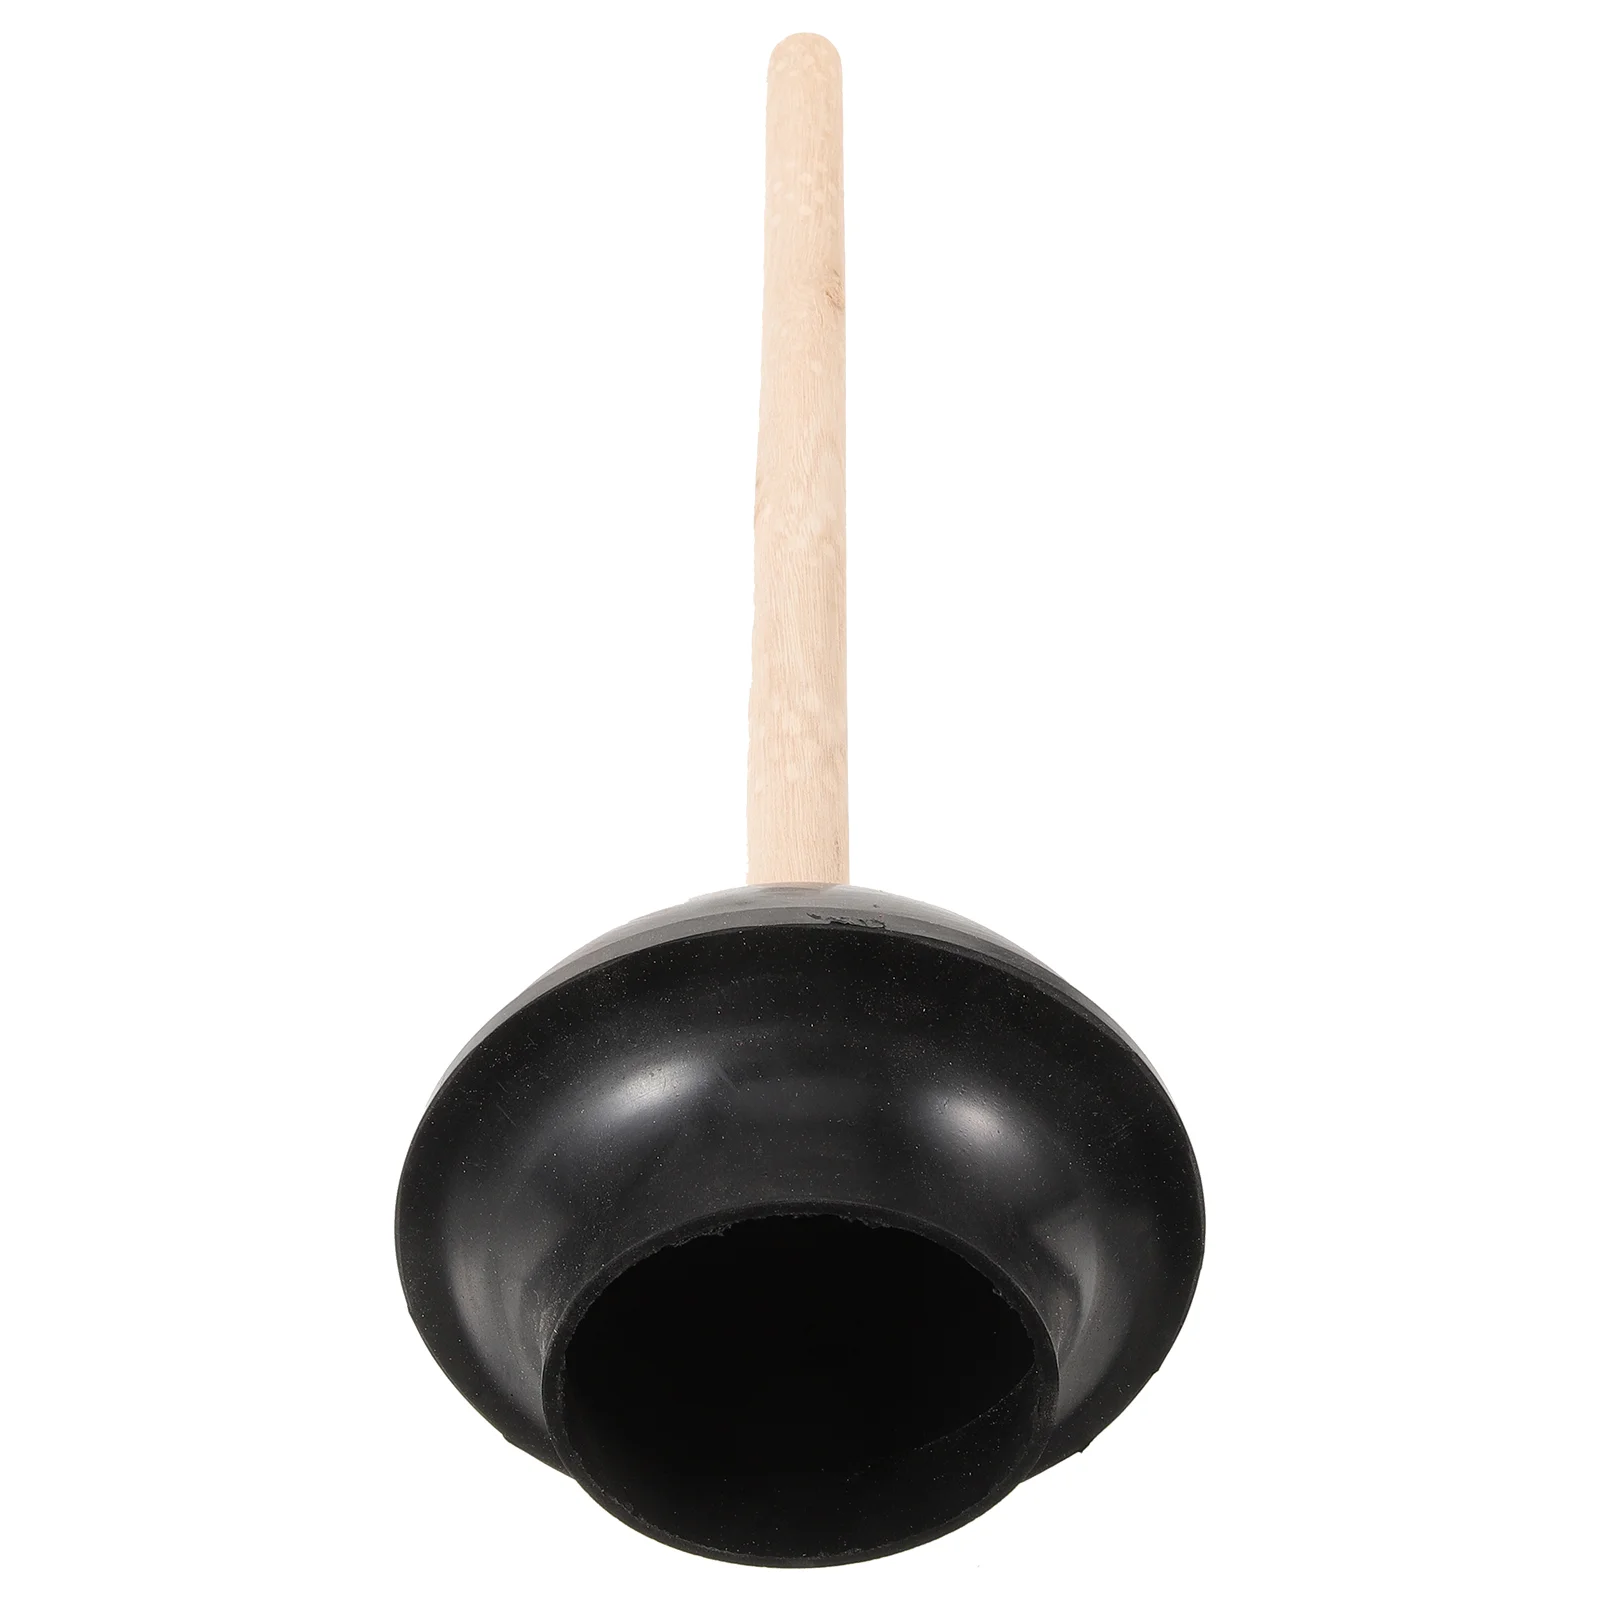 

Toilet Plunger Clogged Heavy Duty Force Cup Rubber Toilet Plunger Wooden Handle Bathroom Unclog Sink Flange Toilet Plungers